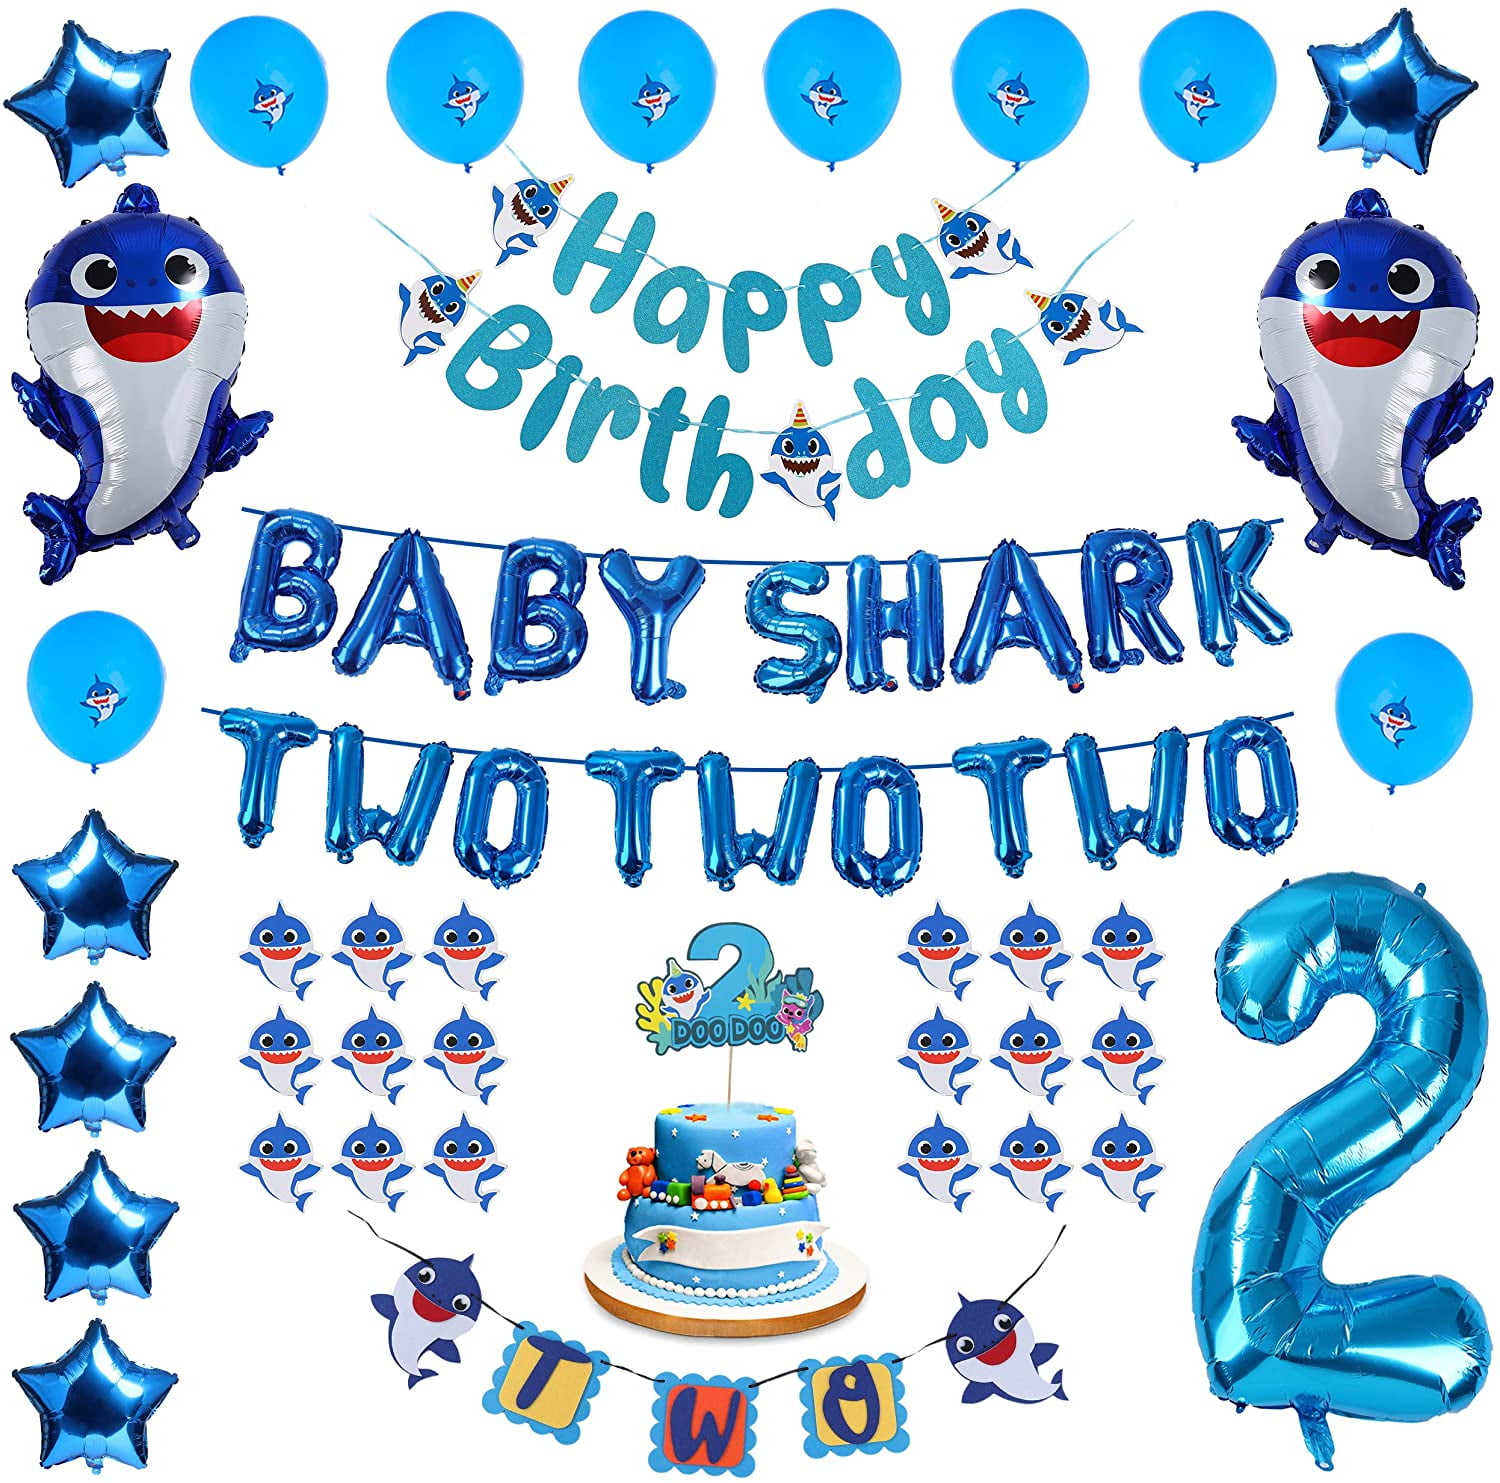 Pink Baby Shark 2nd Birthday Decorations for Girl Pink Baby Shark TWO TWO TWO and Number 2 Foil Balloons 2 DOO DOO Cake Topper Happy Birthday and TWO Banner Cute Shark Latex Balloon Cupcake Toppers For Baby Girls Second Bday 